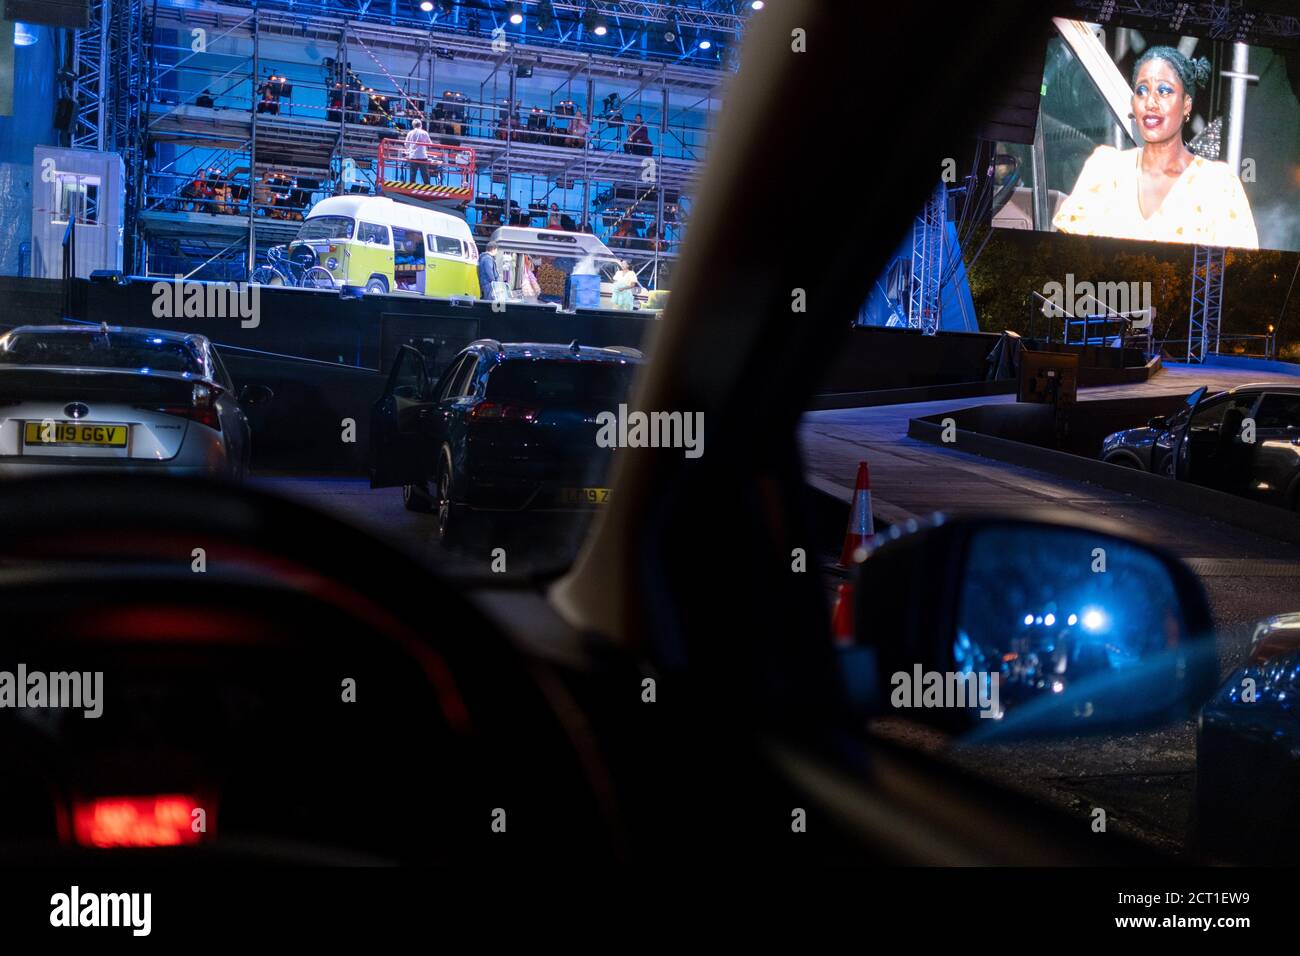 Seen from the driver's seat, British Soprano Nardus Williams plays Mimi in Puccini's La bohème, performed by English National Opera (ENO) as a drive-in (ENO Drive and Live) at Alexandra Palace, on 18th September 2020, in London, England. This is ENO's first public performance since the closure of their West End Colisseum home venue, because of the Coronavirus pandemic lockdown in March. This is Europe's first live drive-in opera production that audiences can safely experience from their cars and ENO's first public performance since the closure of their West End Colisseum home venue, because of Stock Photo